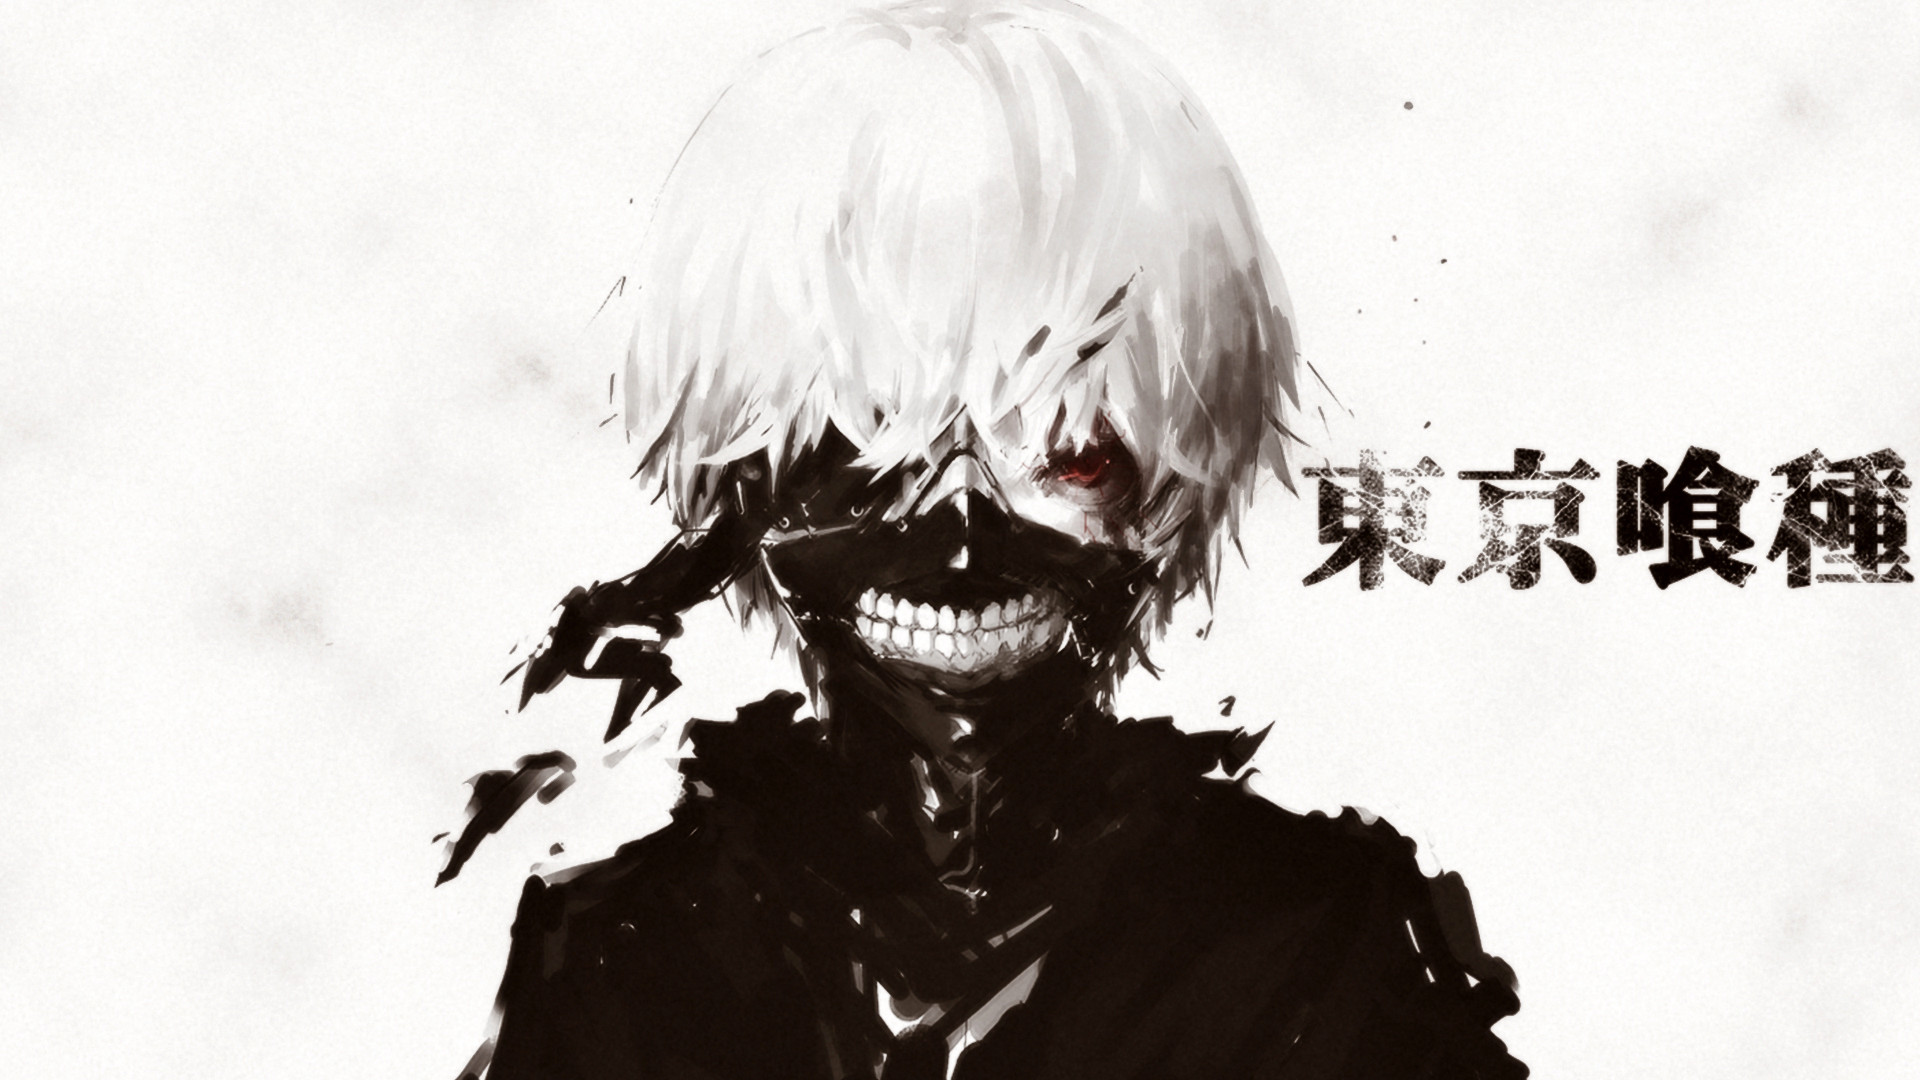 1920x1080 Tokyo ghoul Wallpapers HD Desktop Backgrounds Images and Pictures 1920Ã1080